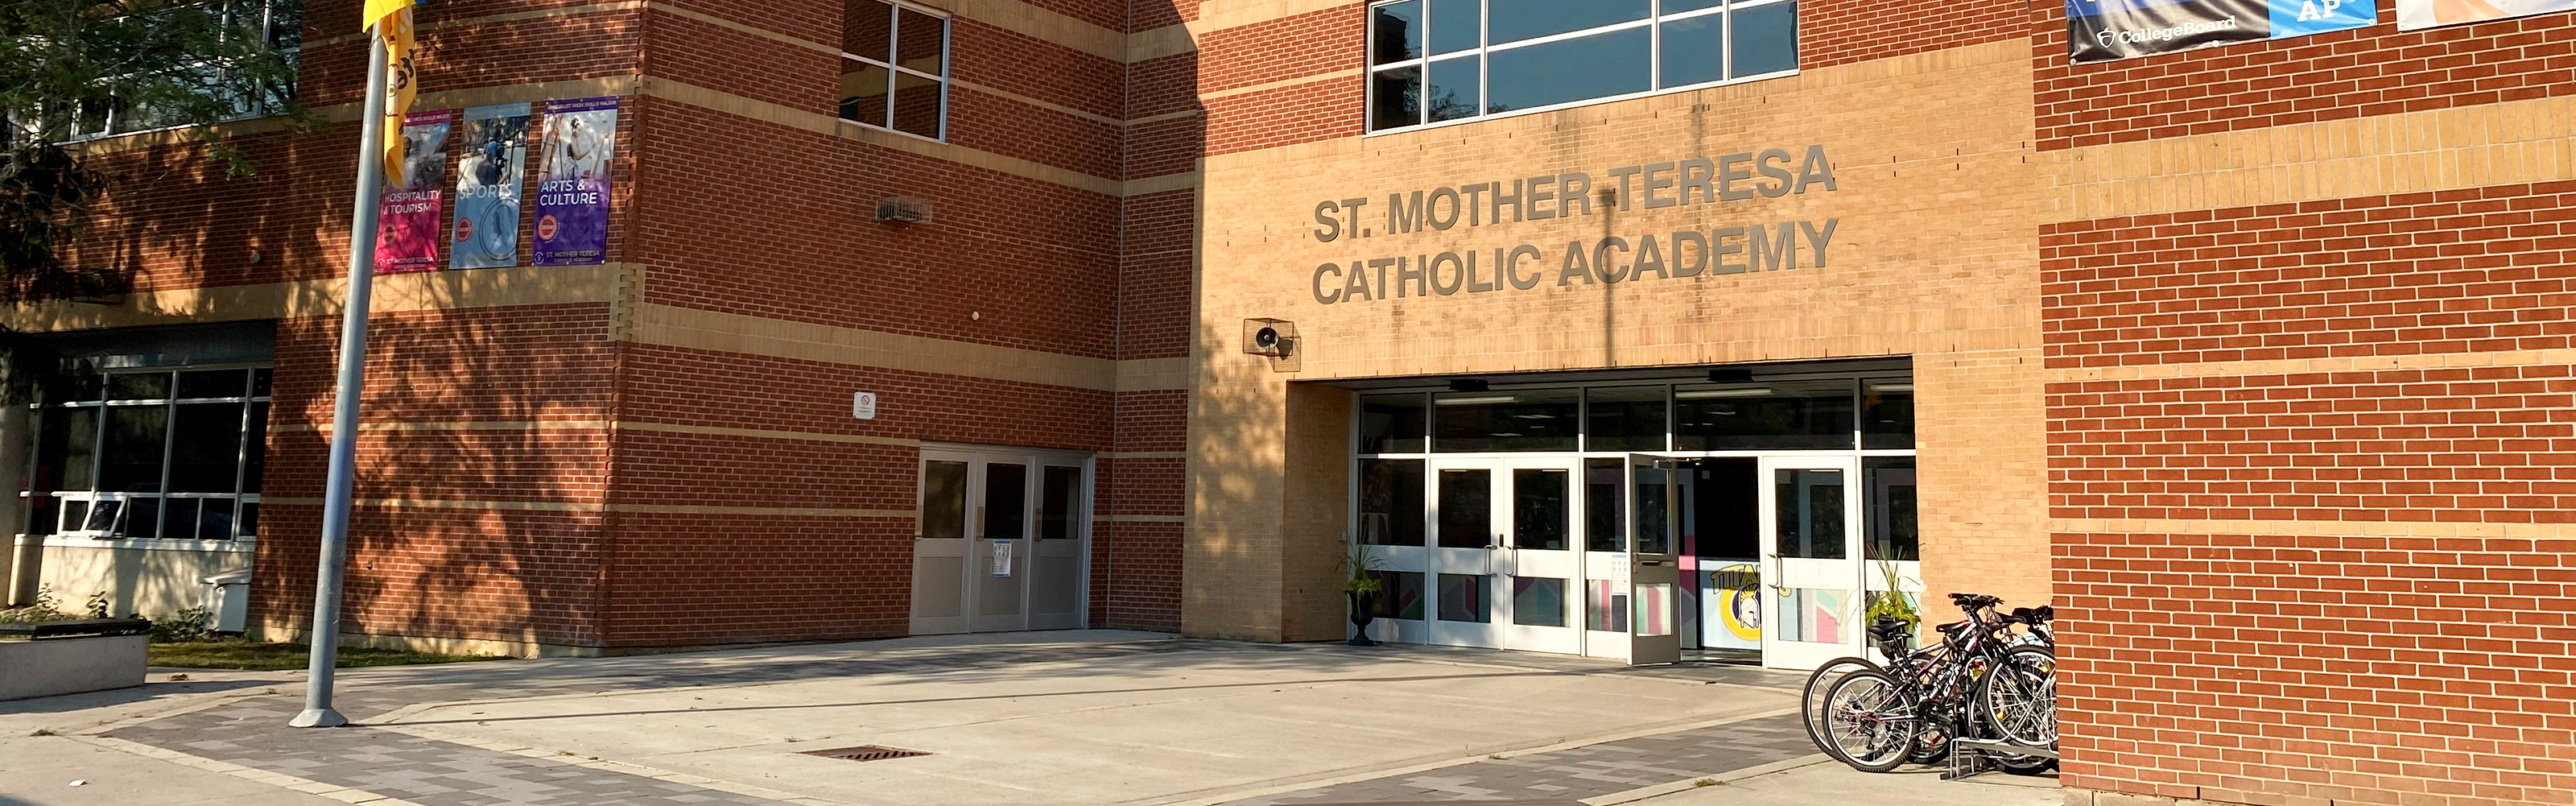 Front of the St. Mother Teresa Catholic Academy school building